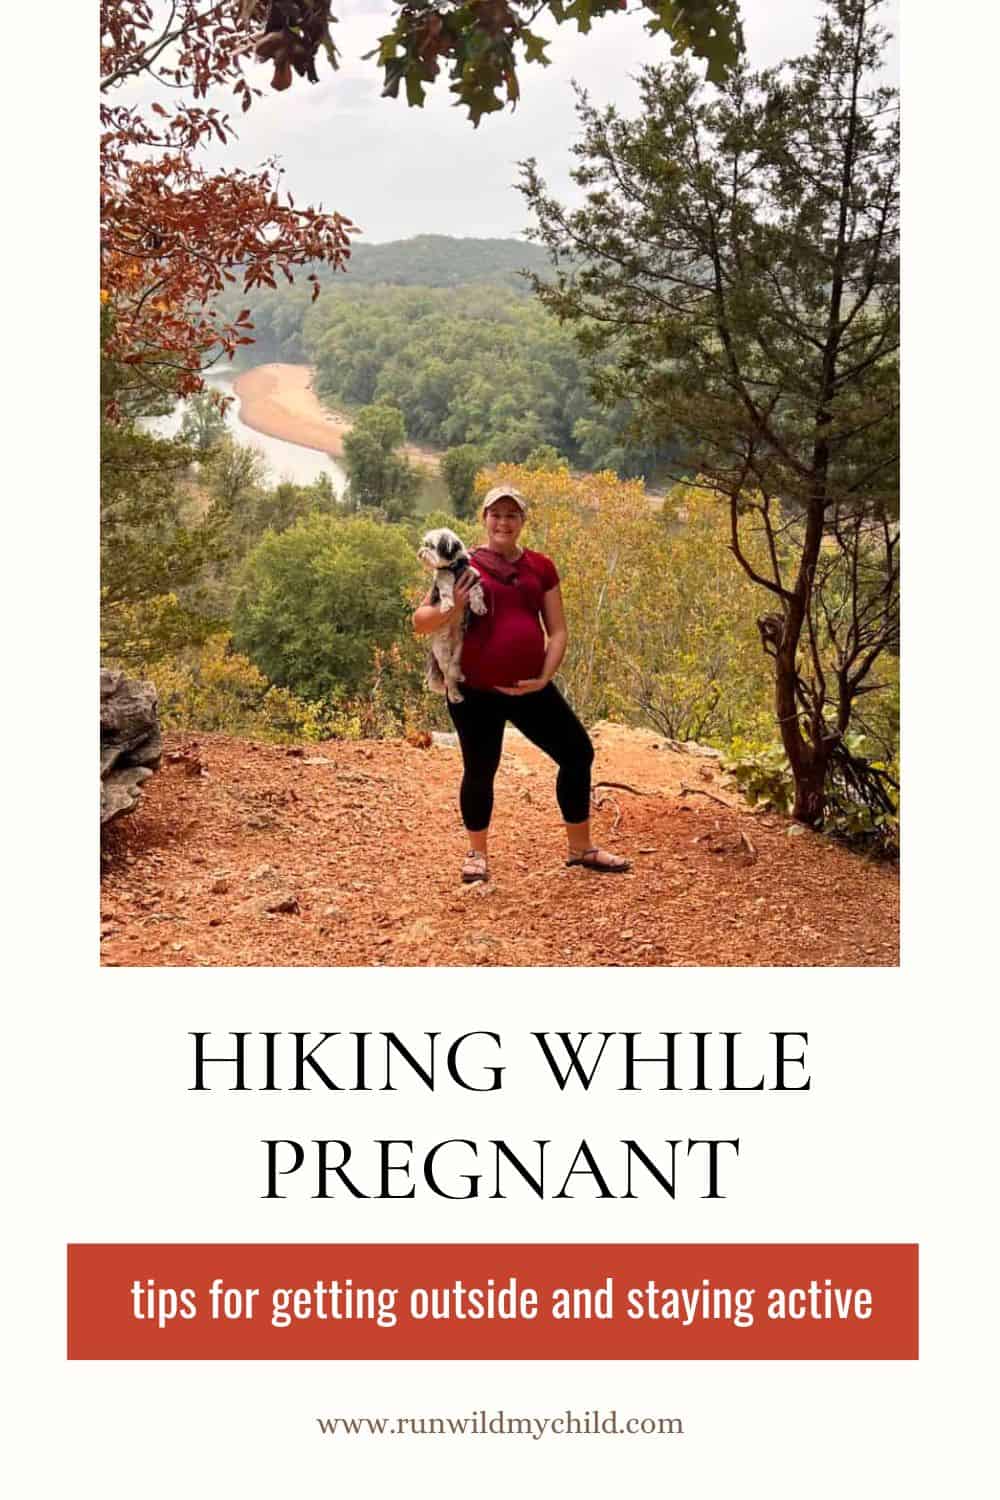 tips and advice for hiking and getting outside while pregnant